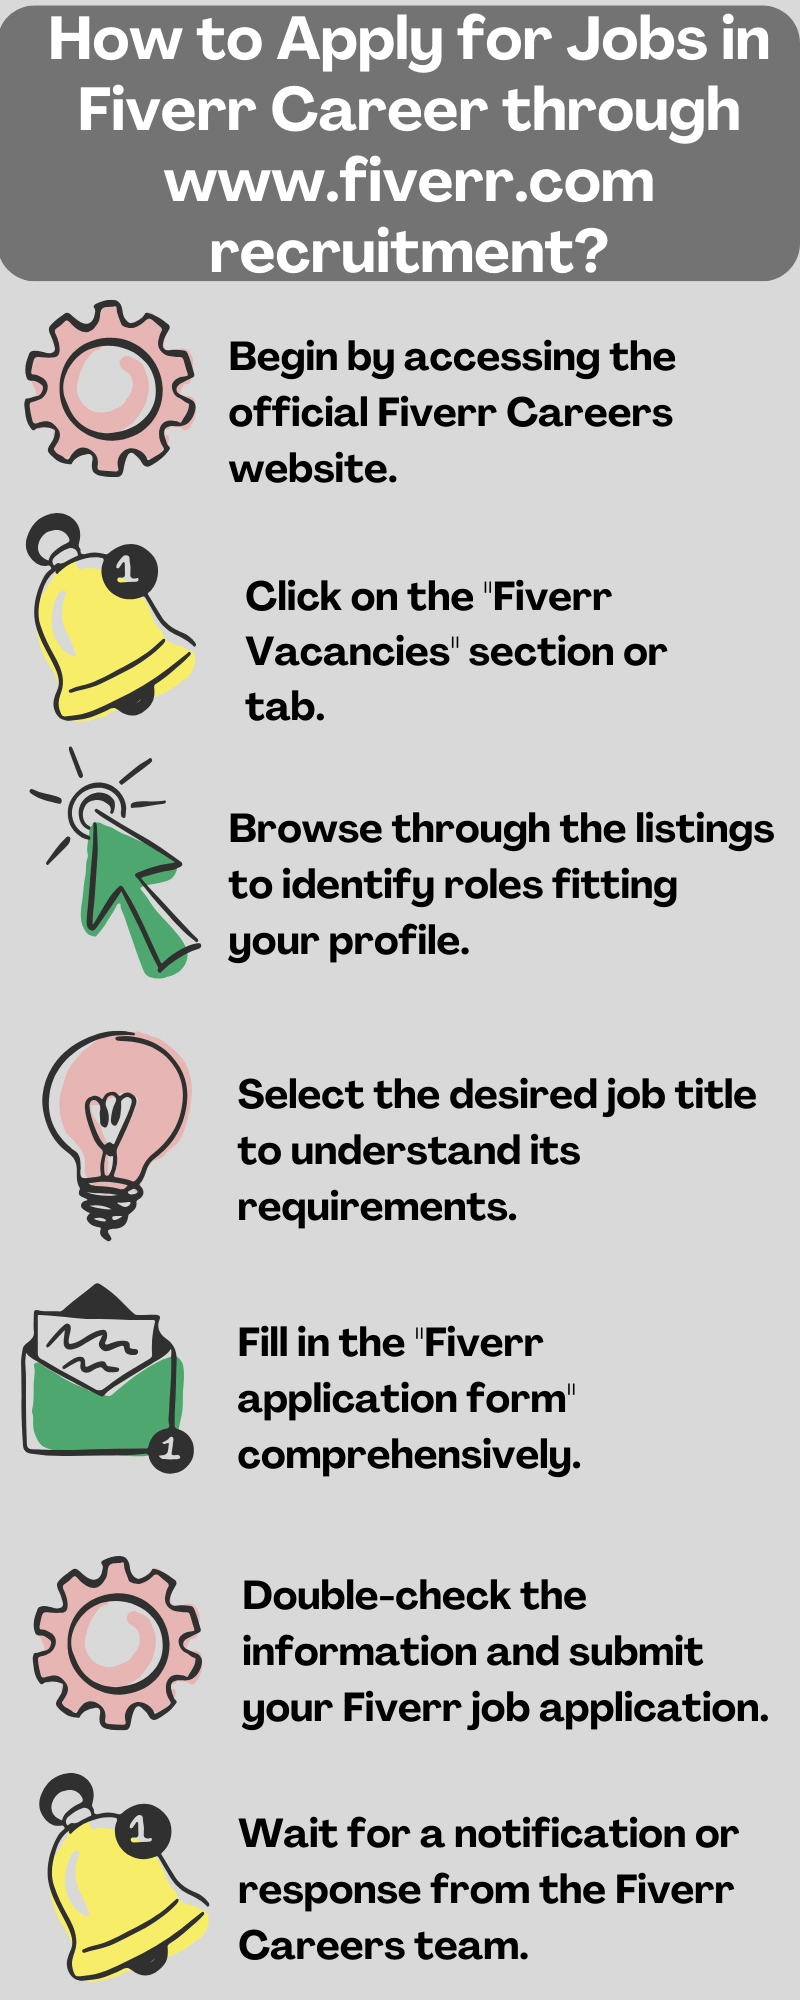 How to Apply for Jobs in Fiverr Career through www.fiverr.com recruitment?